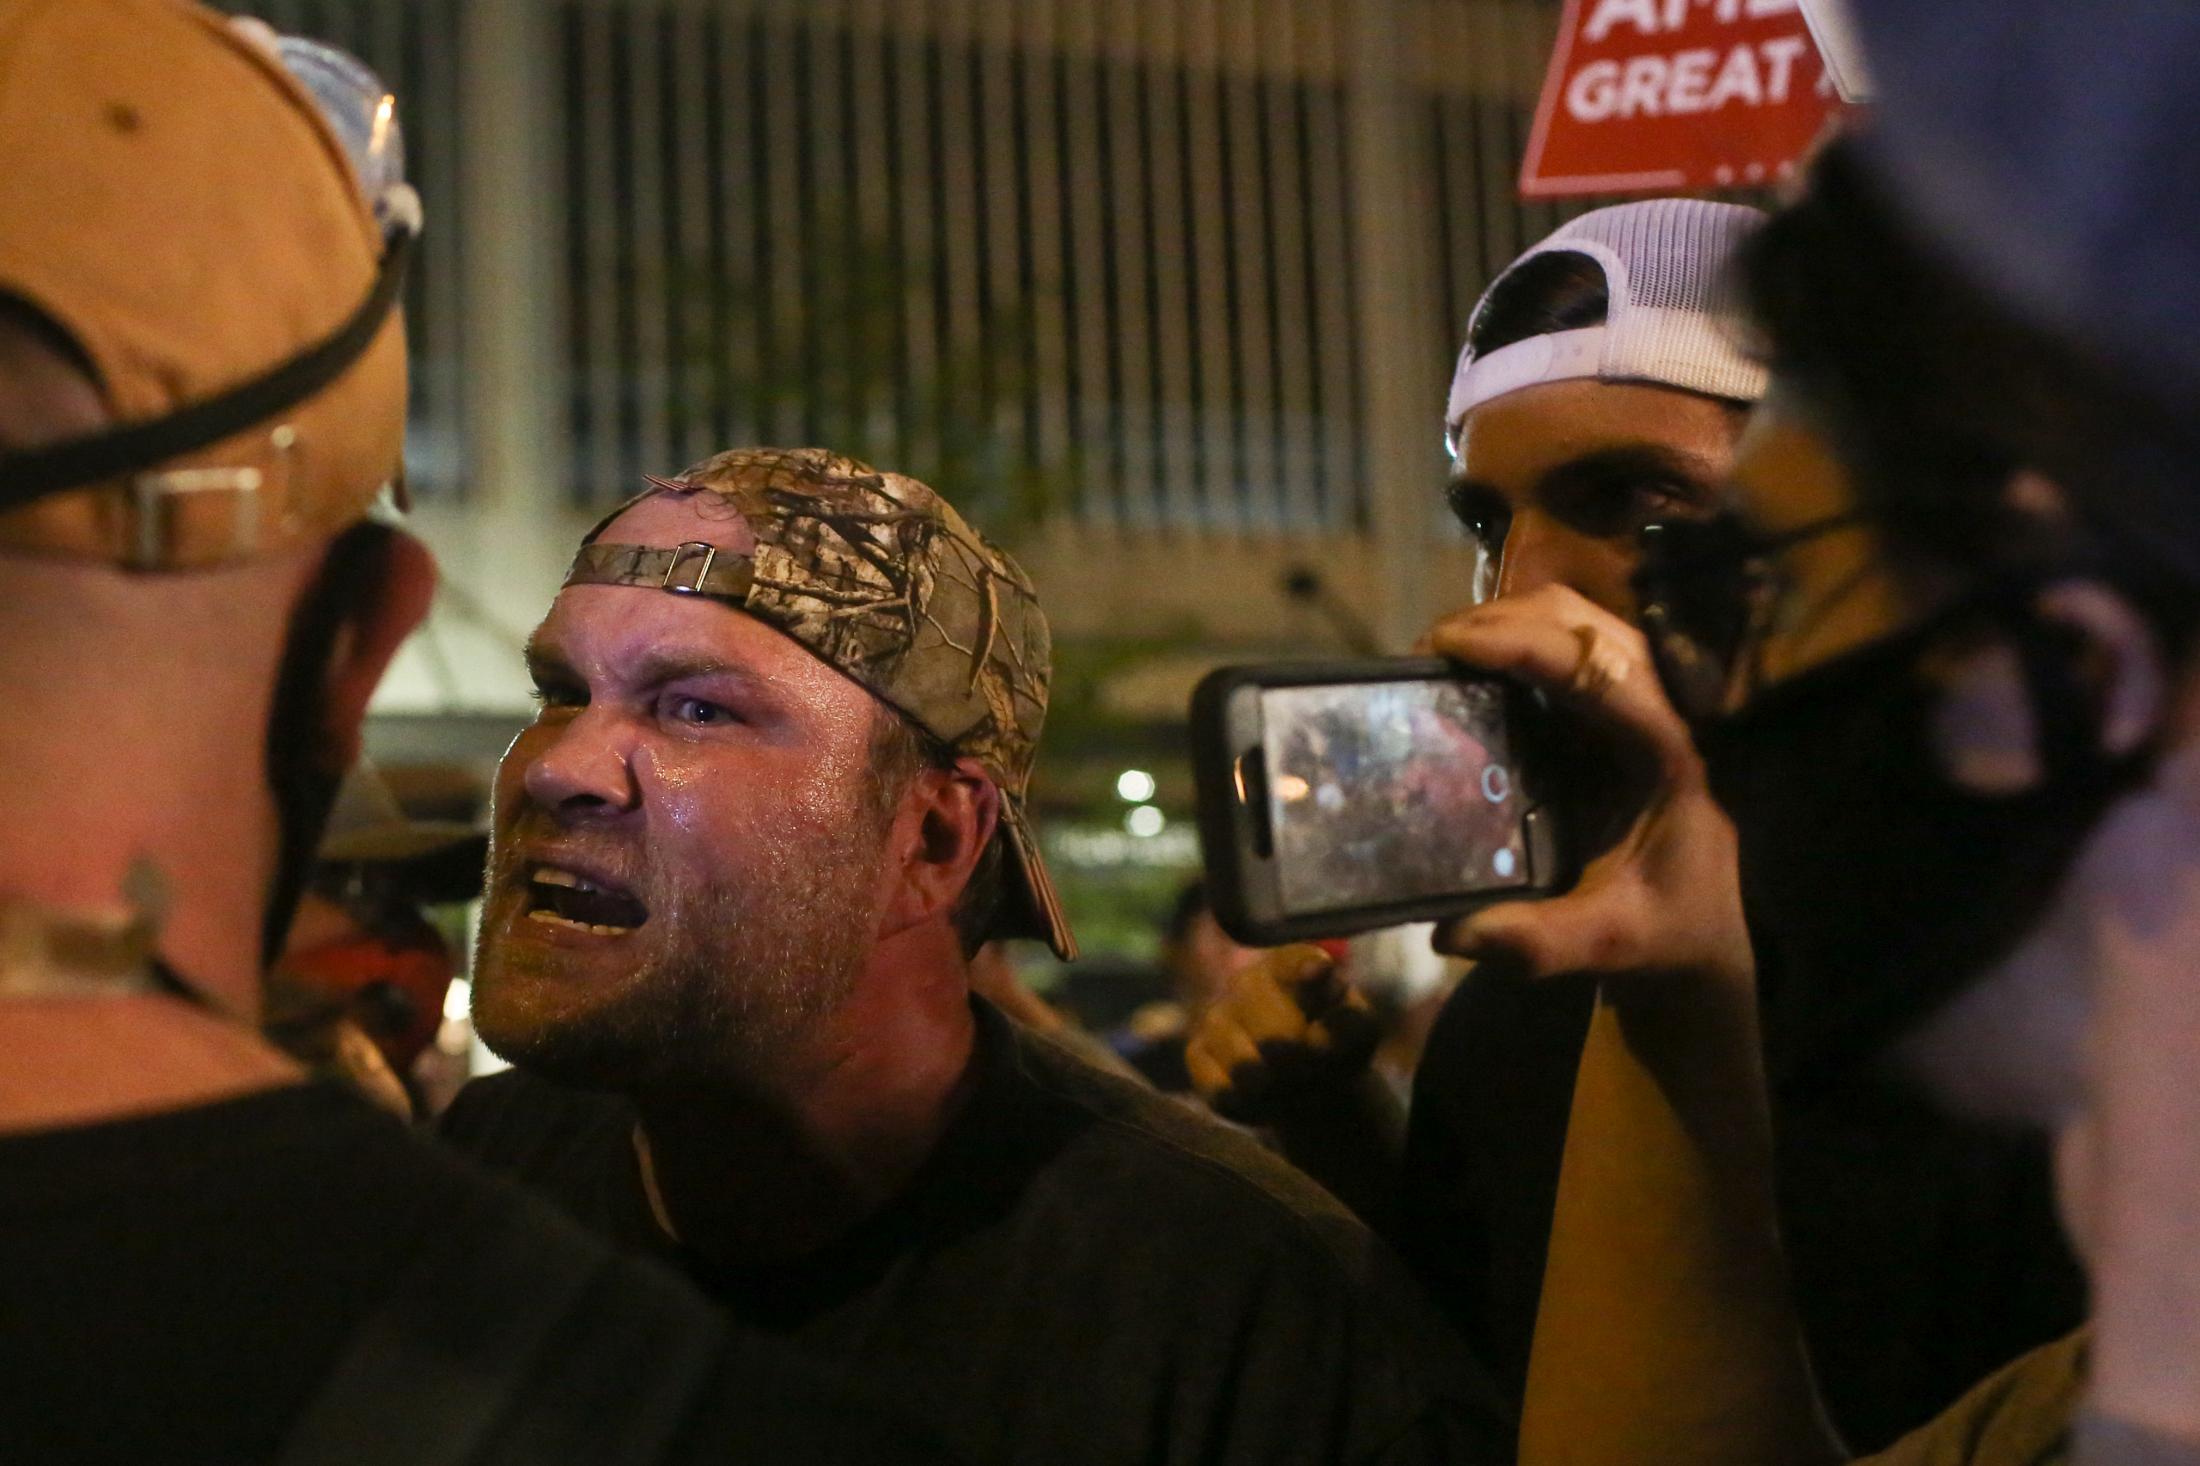 Waiting for Trump -  A supporter of Donald Trump yells at a protester during...